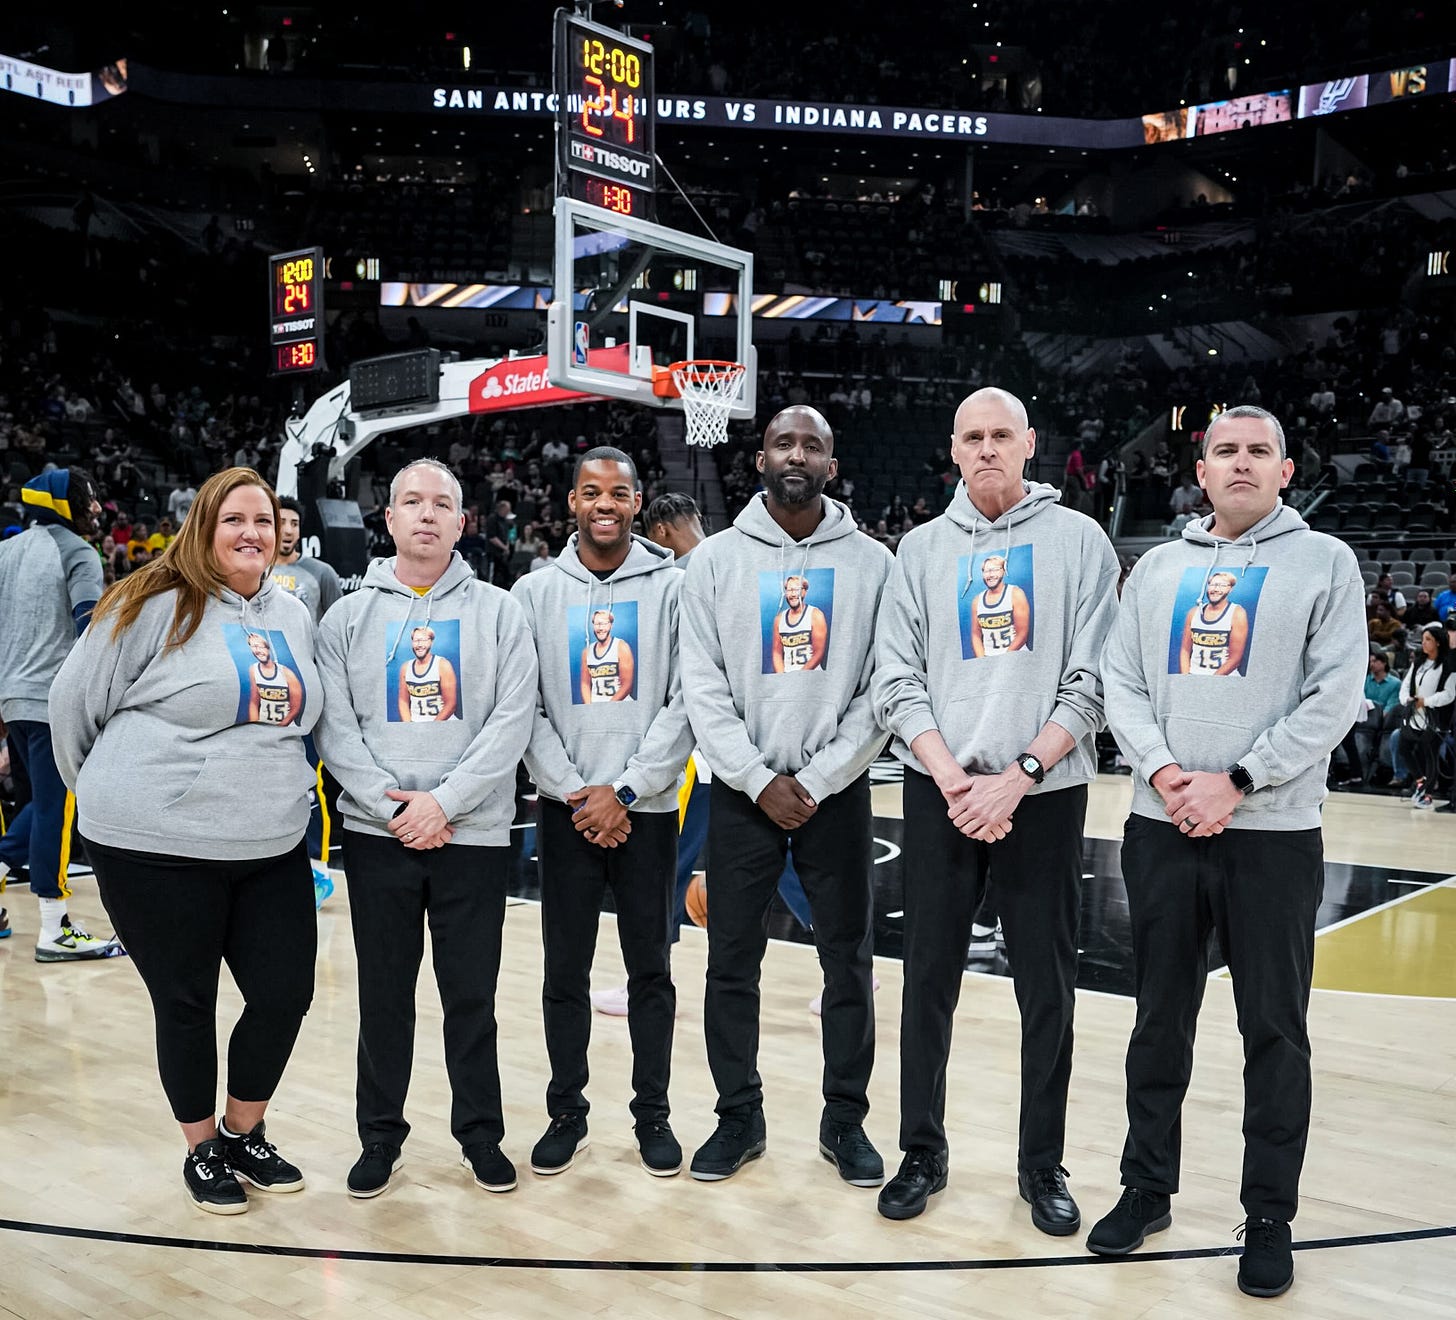 The Pacers coaching staff wore special hoodies to honor David Benner Thursday in San Antonio